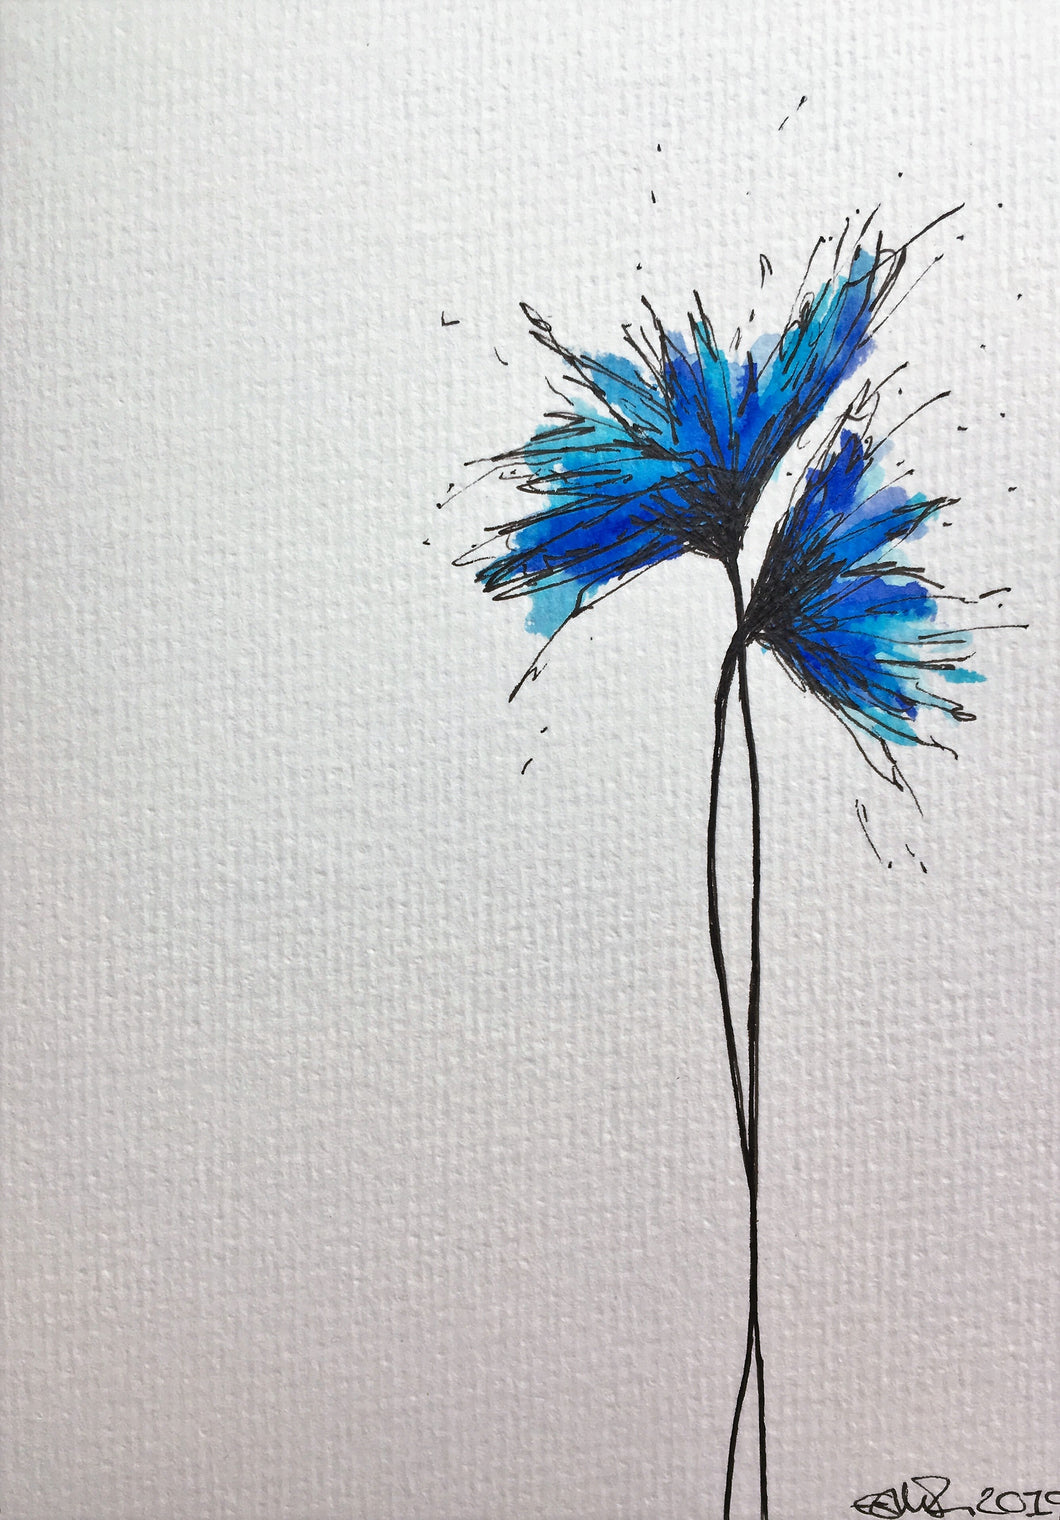 Hand-painted greeting card - Turquoise and blue spiky flowers design - eDgE dEsiGn London